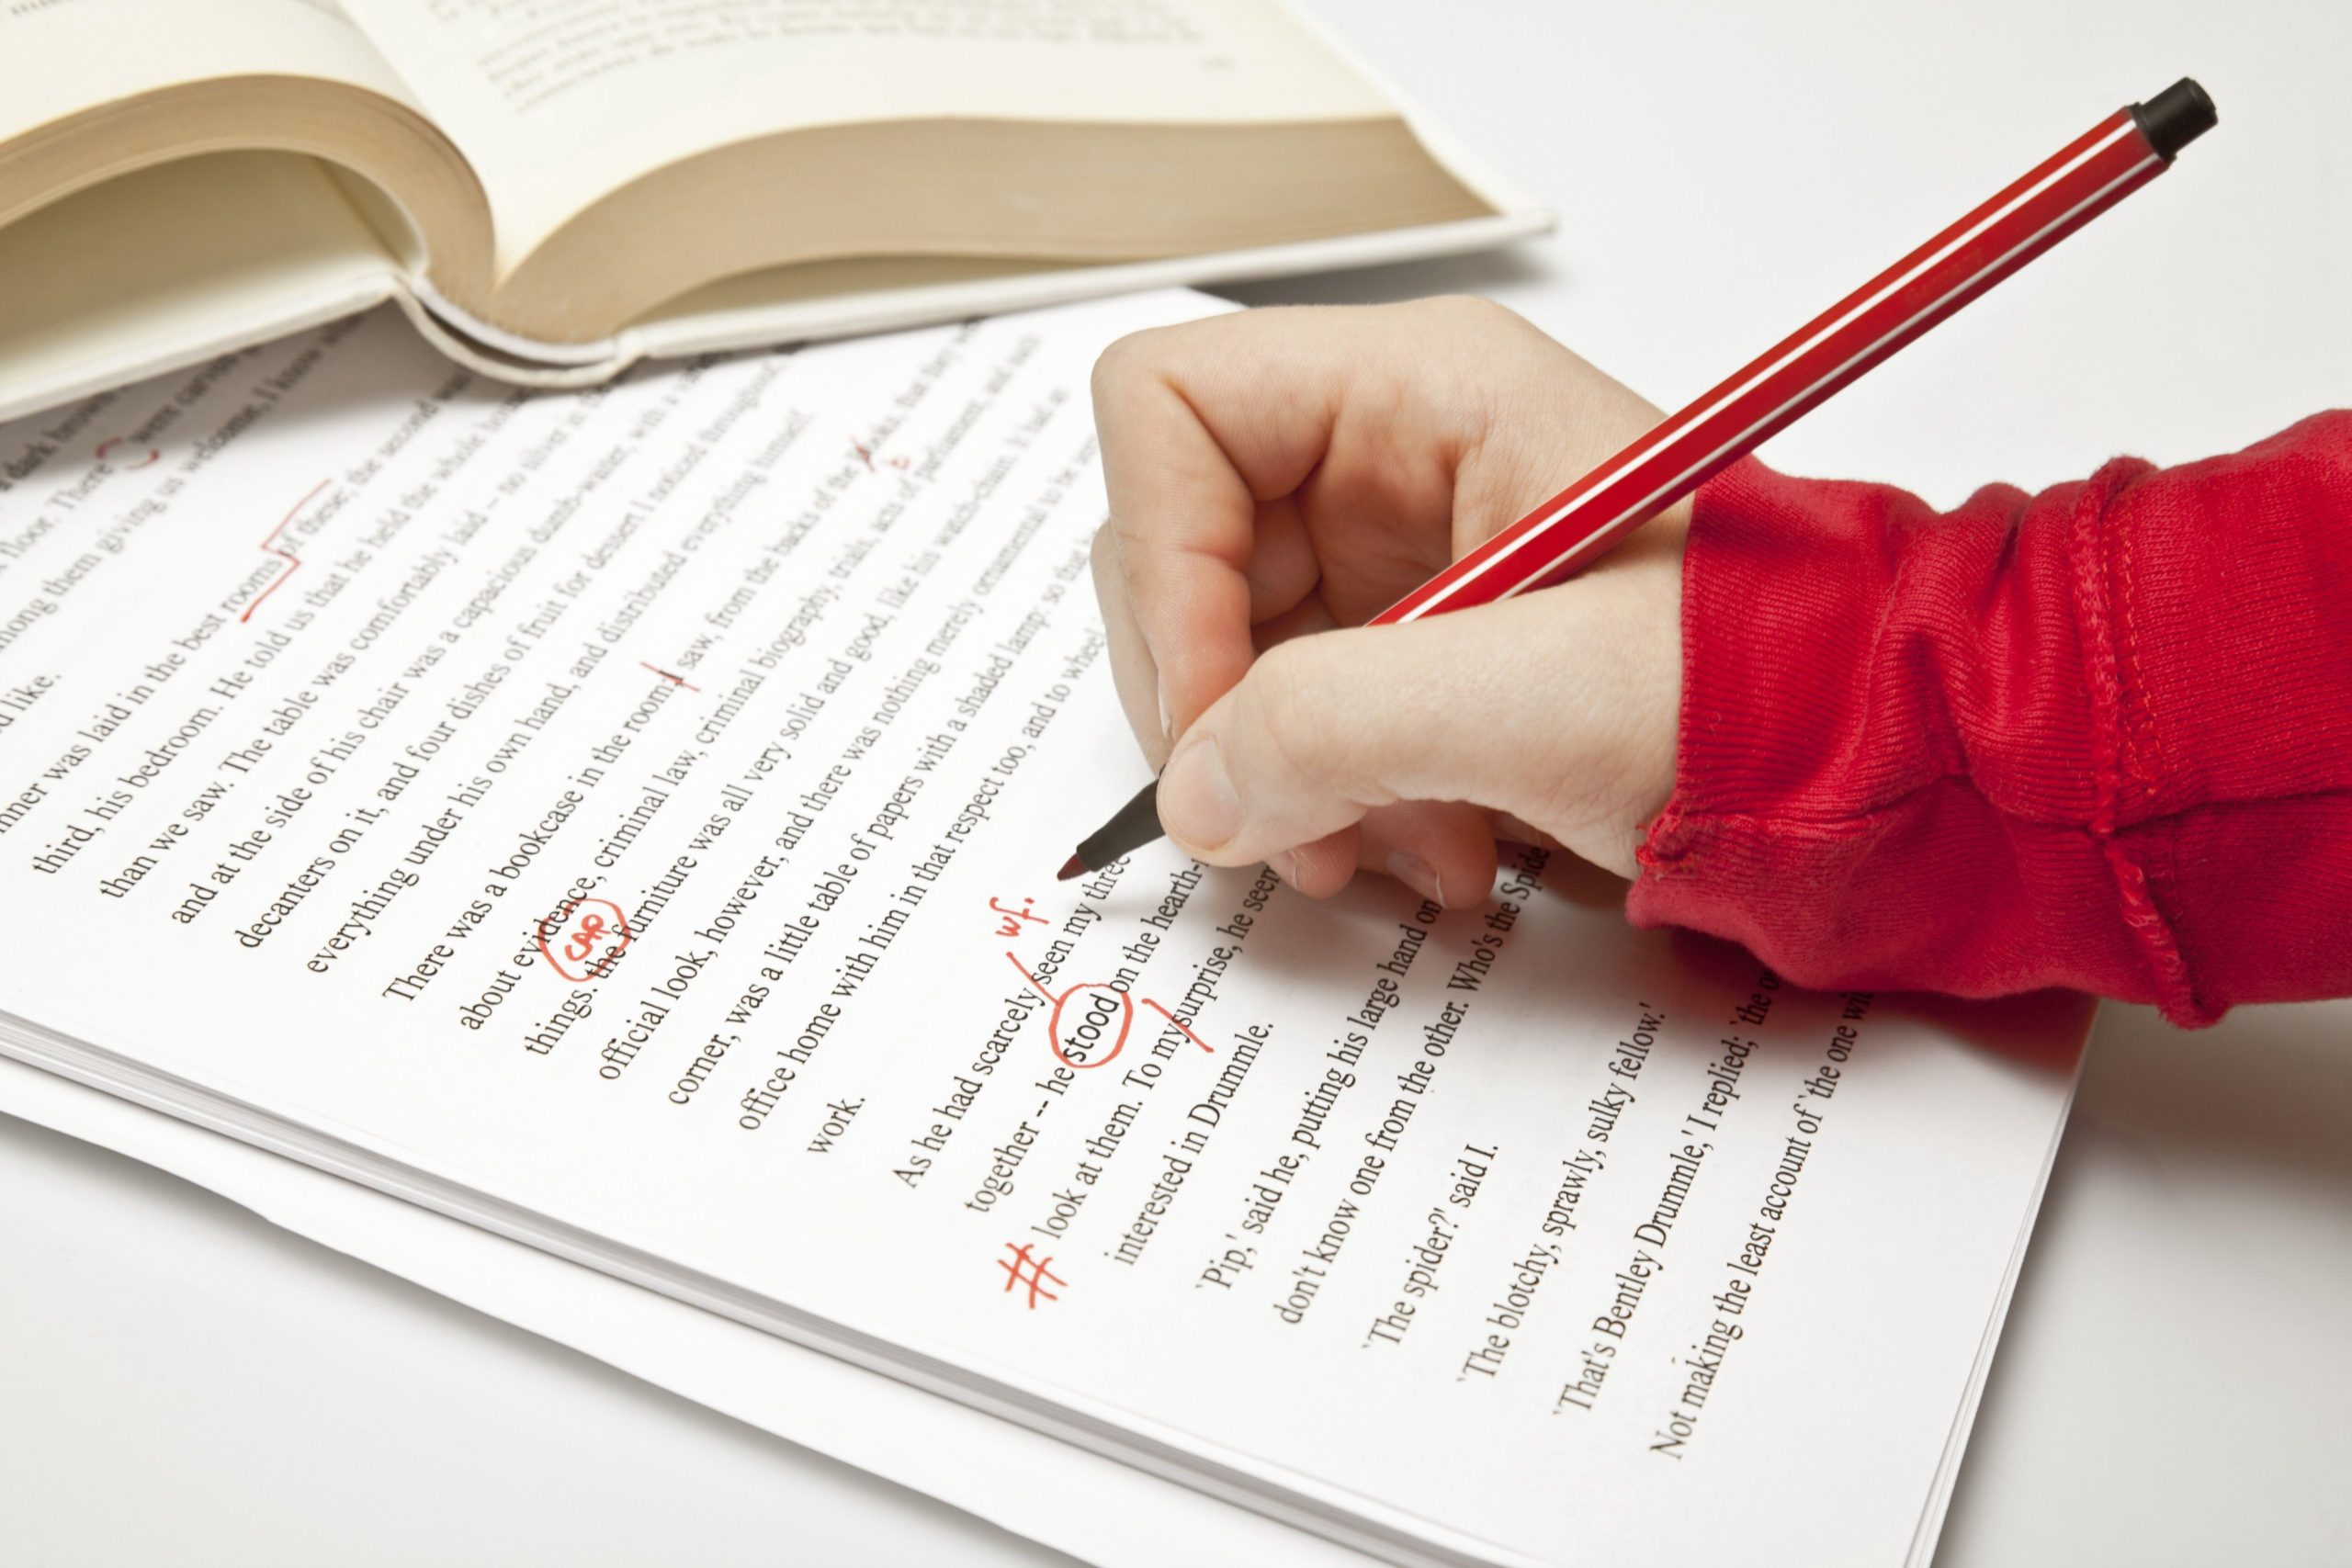 importance of proofreading an essay